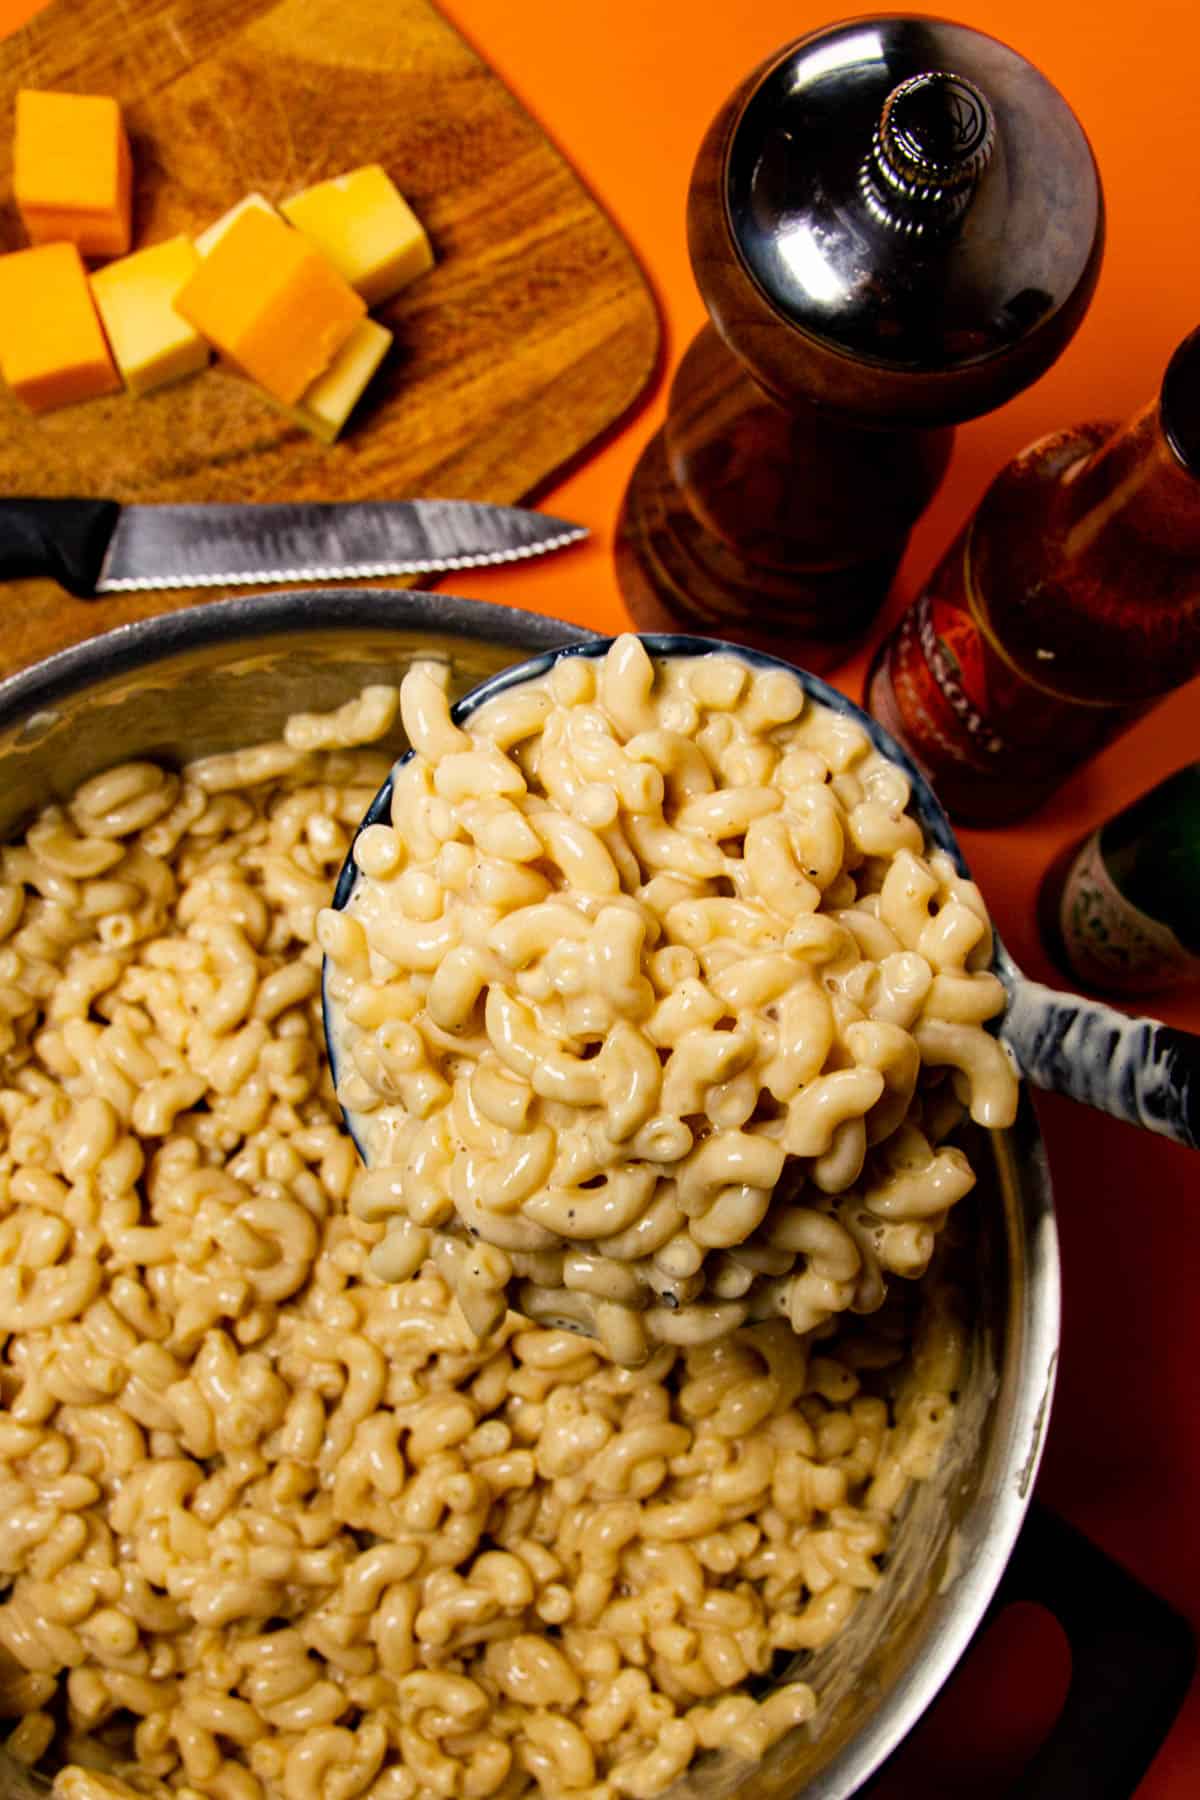 Macaroni and cheese in a giant ladle with a pepper shaker and cheddar cheese in the background.